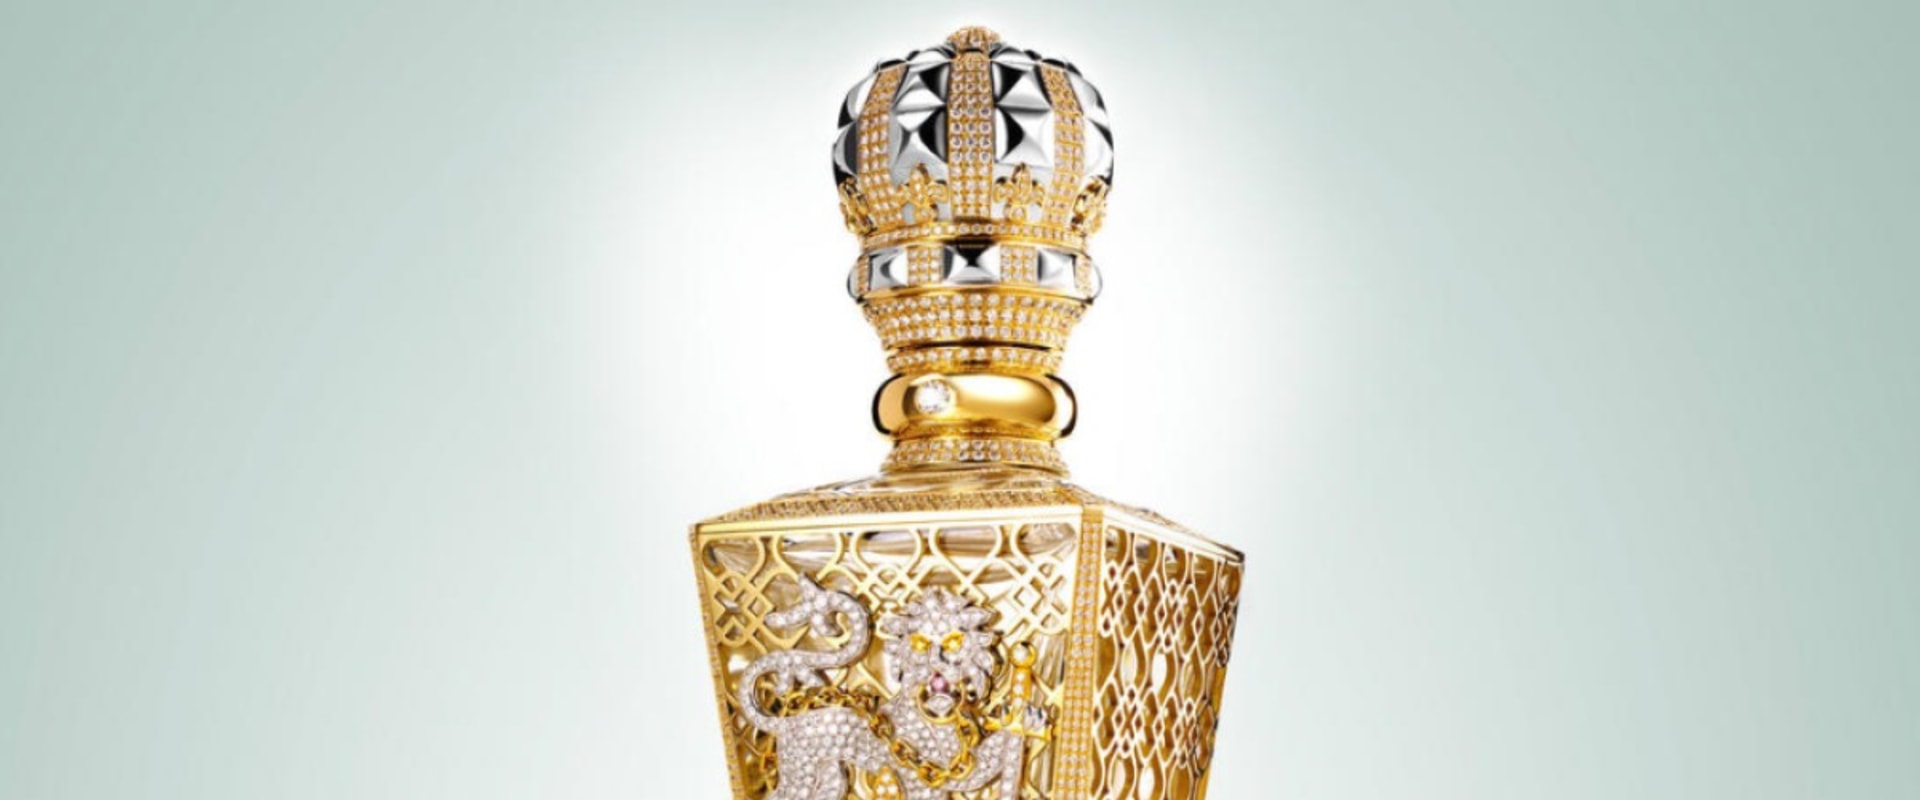 What is the most expensive perfume brand?